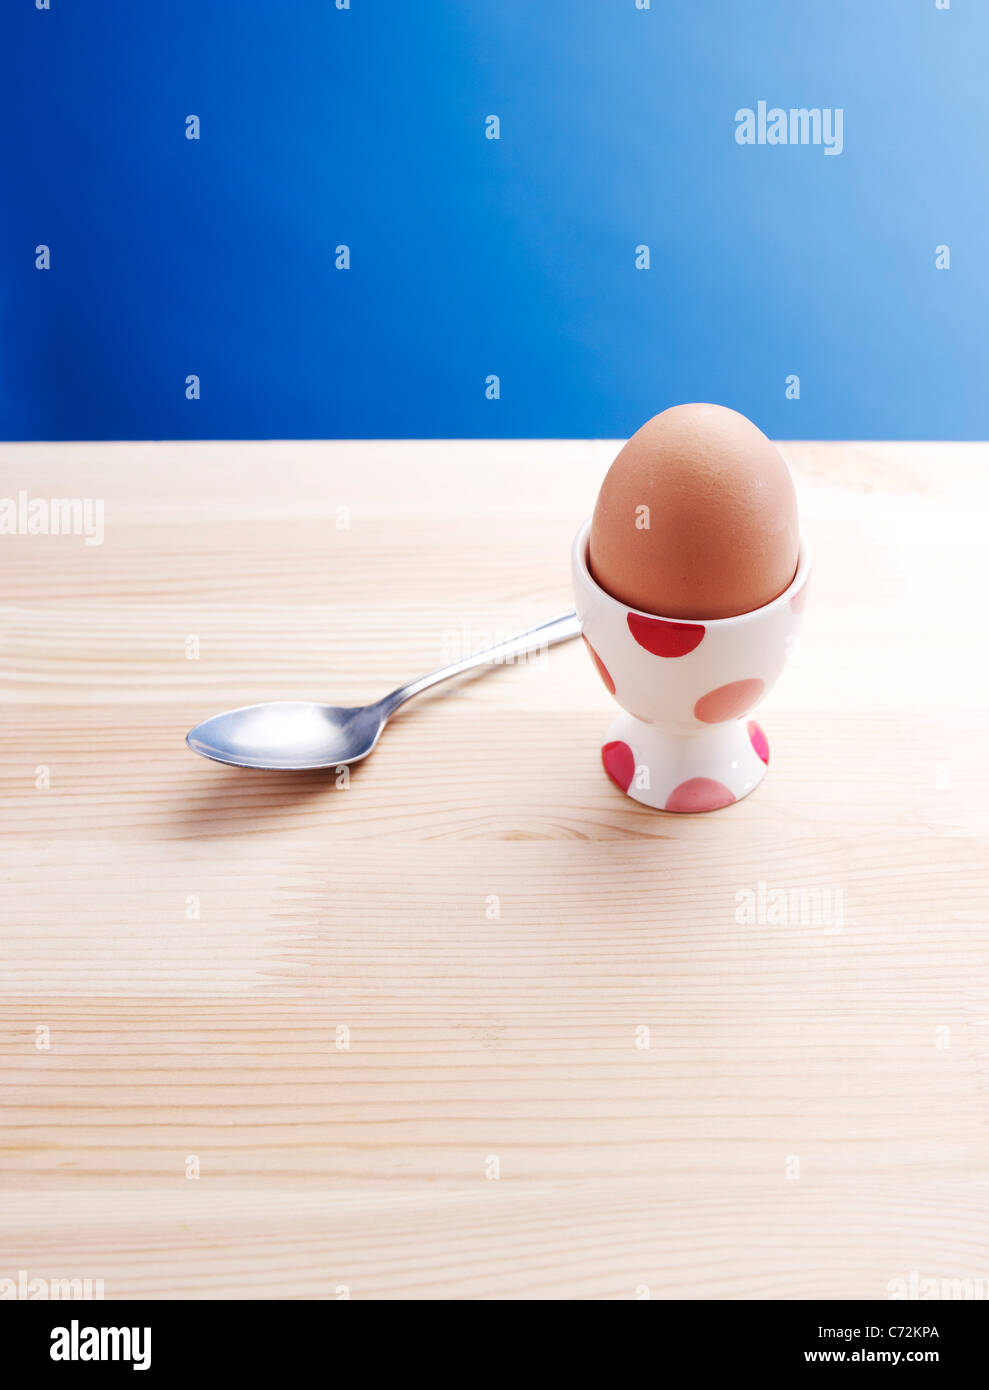 Boiled egg in an egg cup on a wooden table Stock Photo